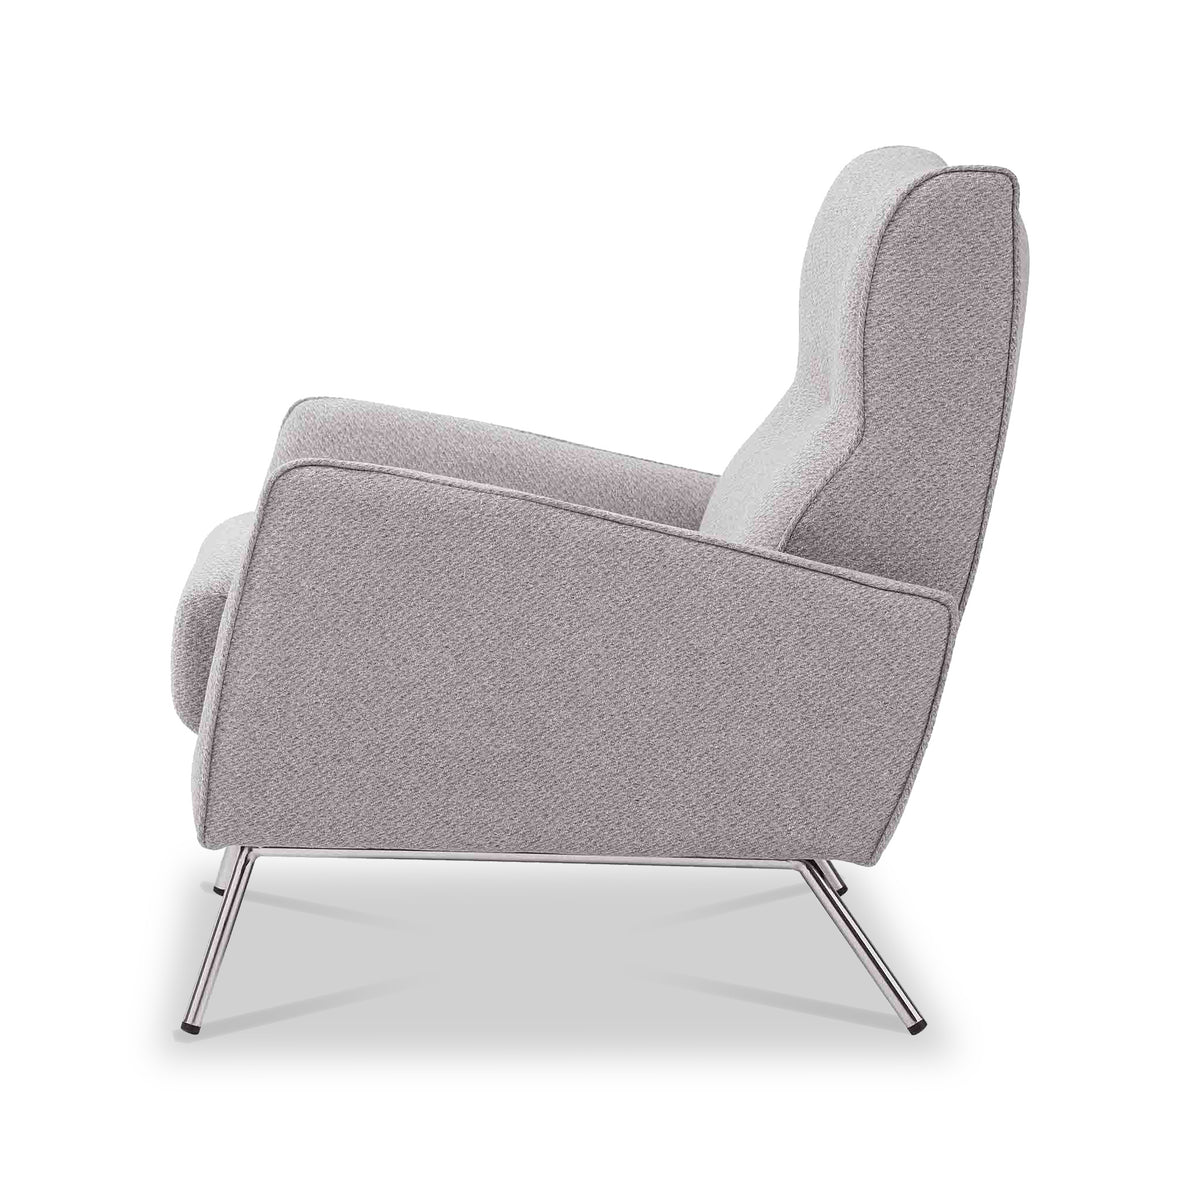 Charlie Accent Chair in Grey Linen by Roseland Furniture